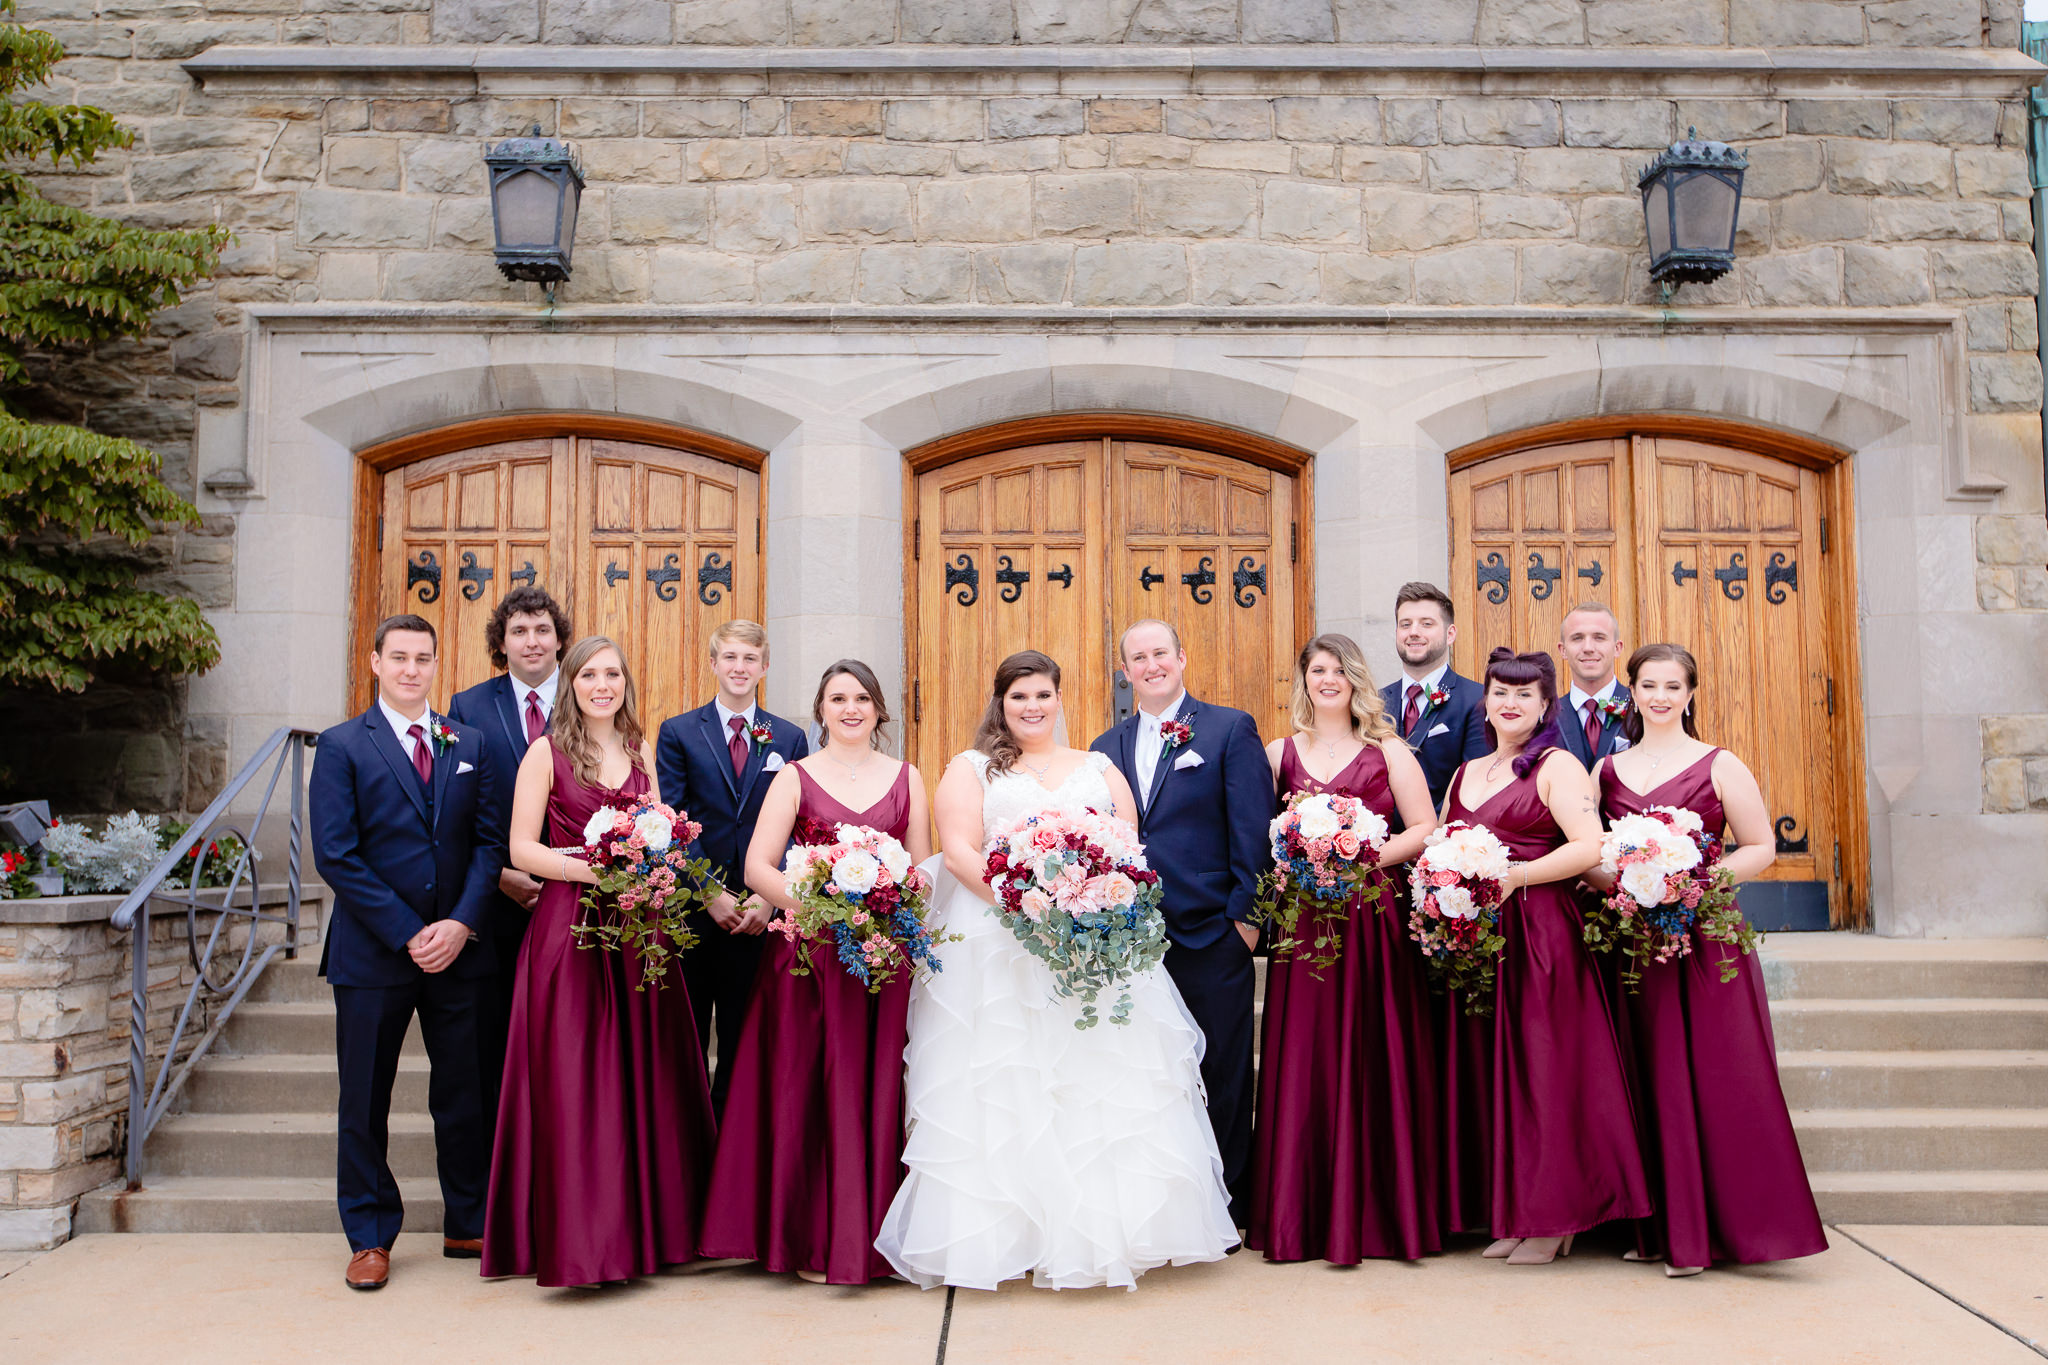 The entire wedding party poses together outside of Mt. Lebanon United Methodist Church